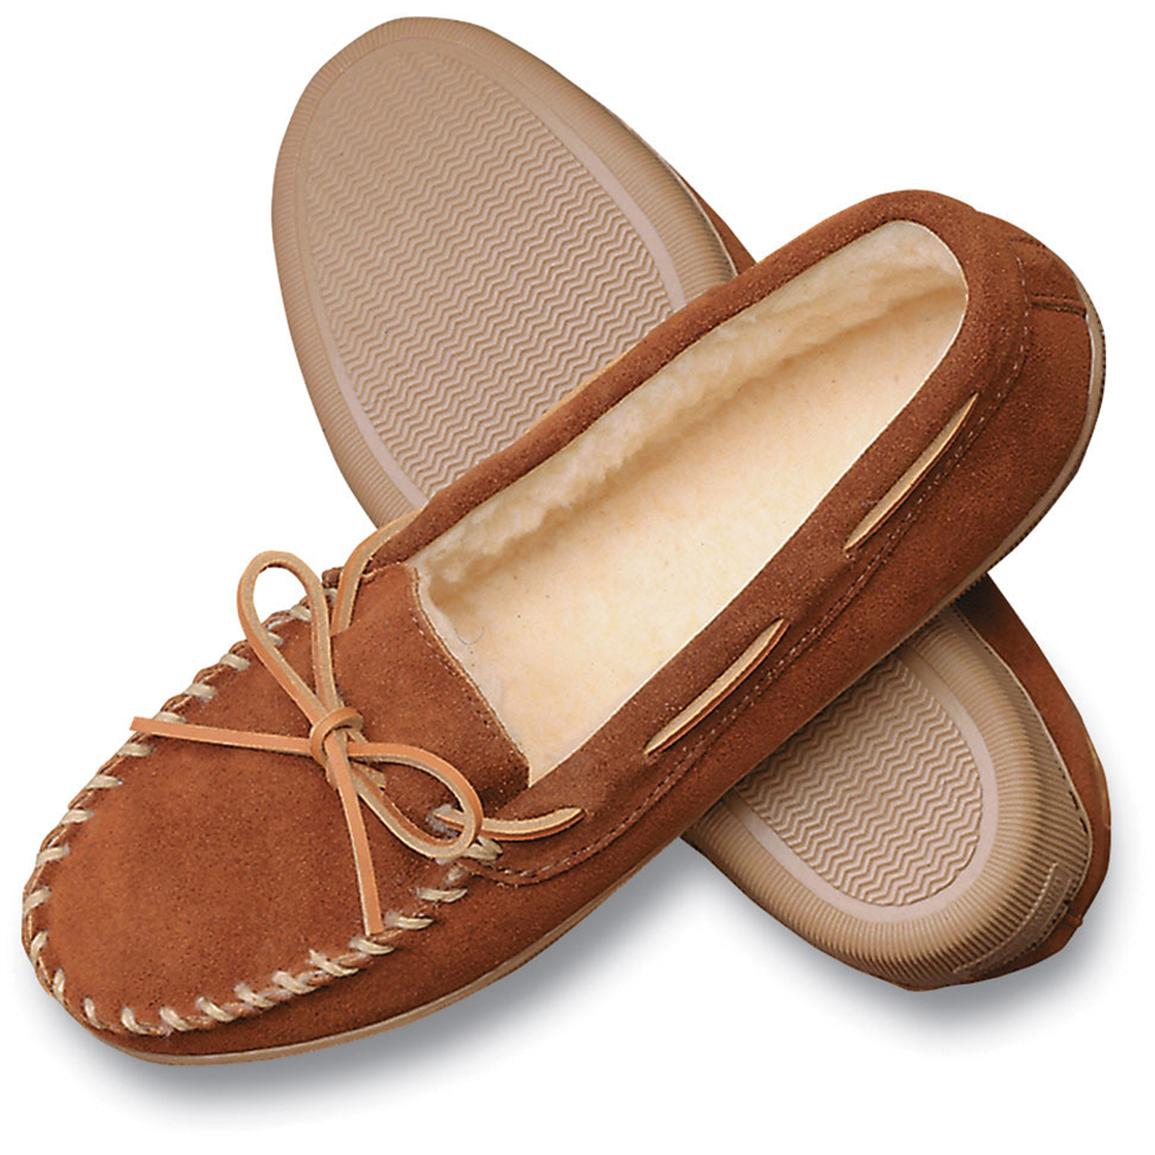 extra outdoor Slippers / 95314, Brown Slipper, men at   wide Indoor for indoor outdoor Guide slippers Sportsman's